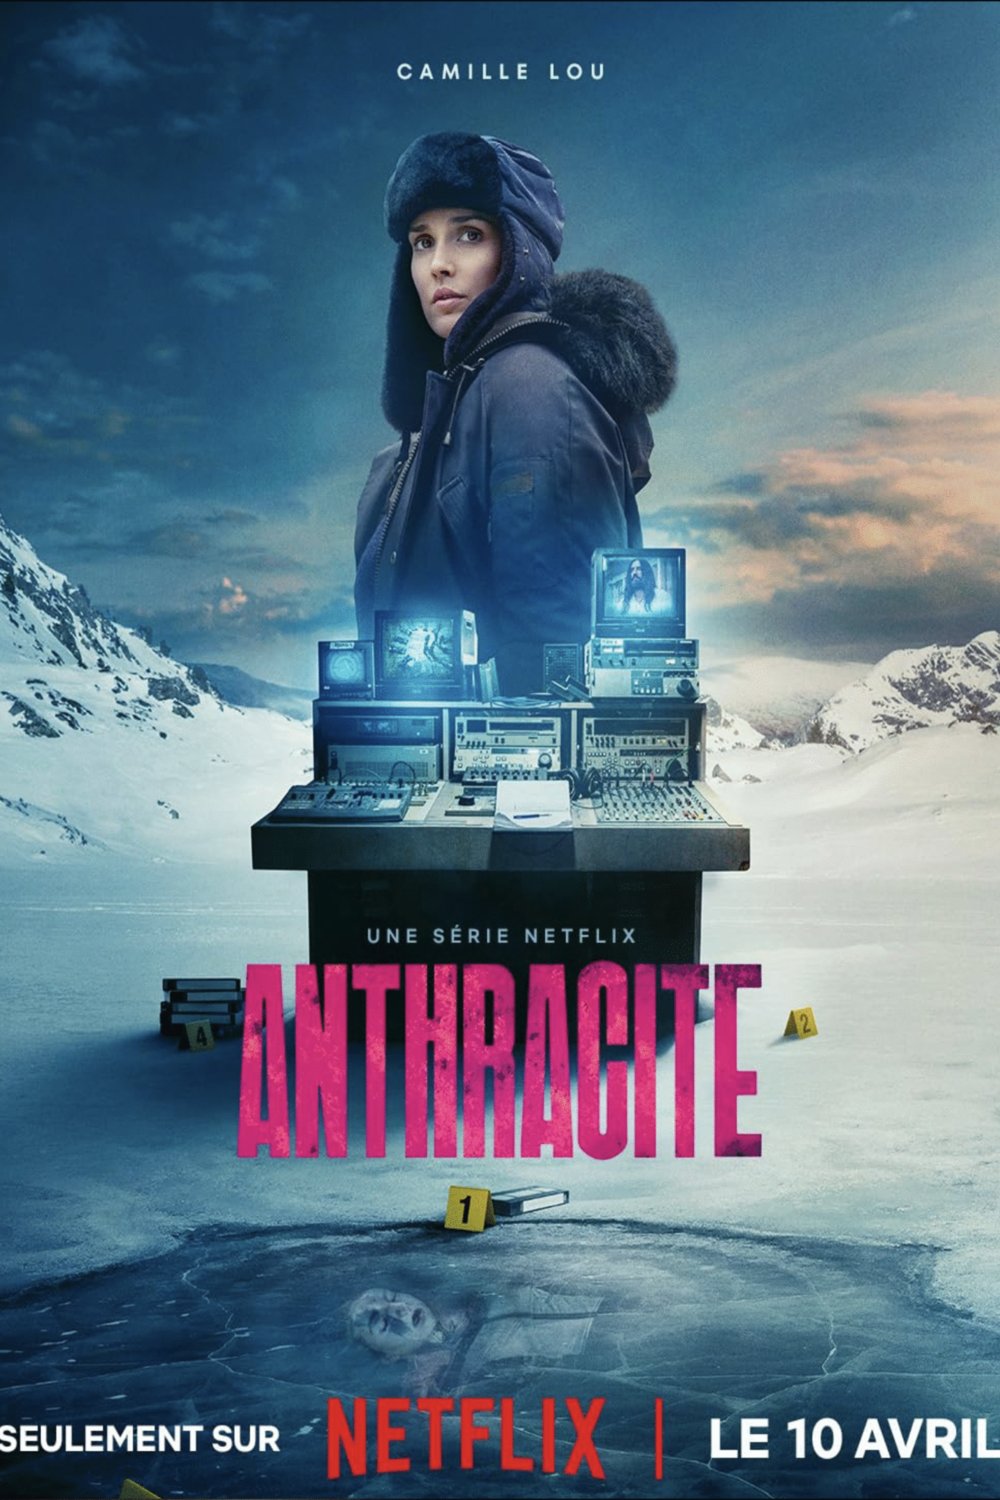 Poster of the movie Antracite